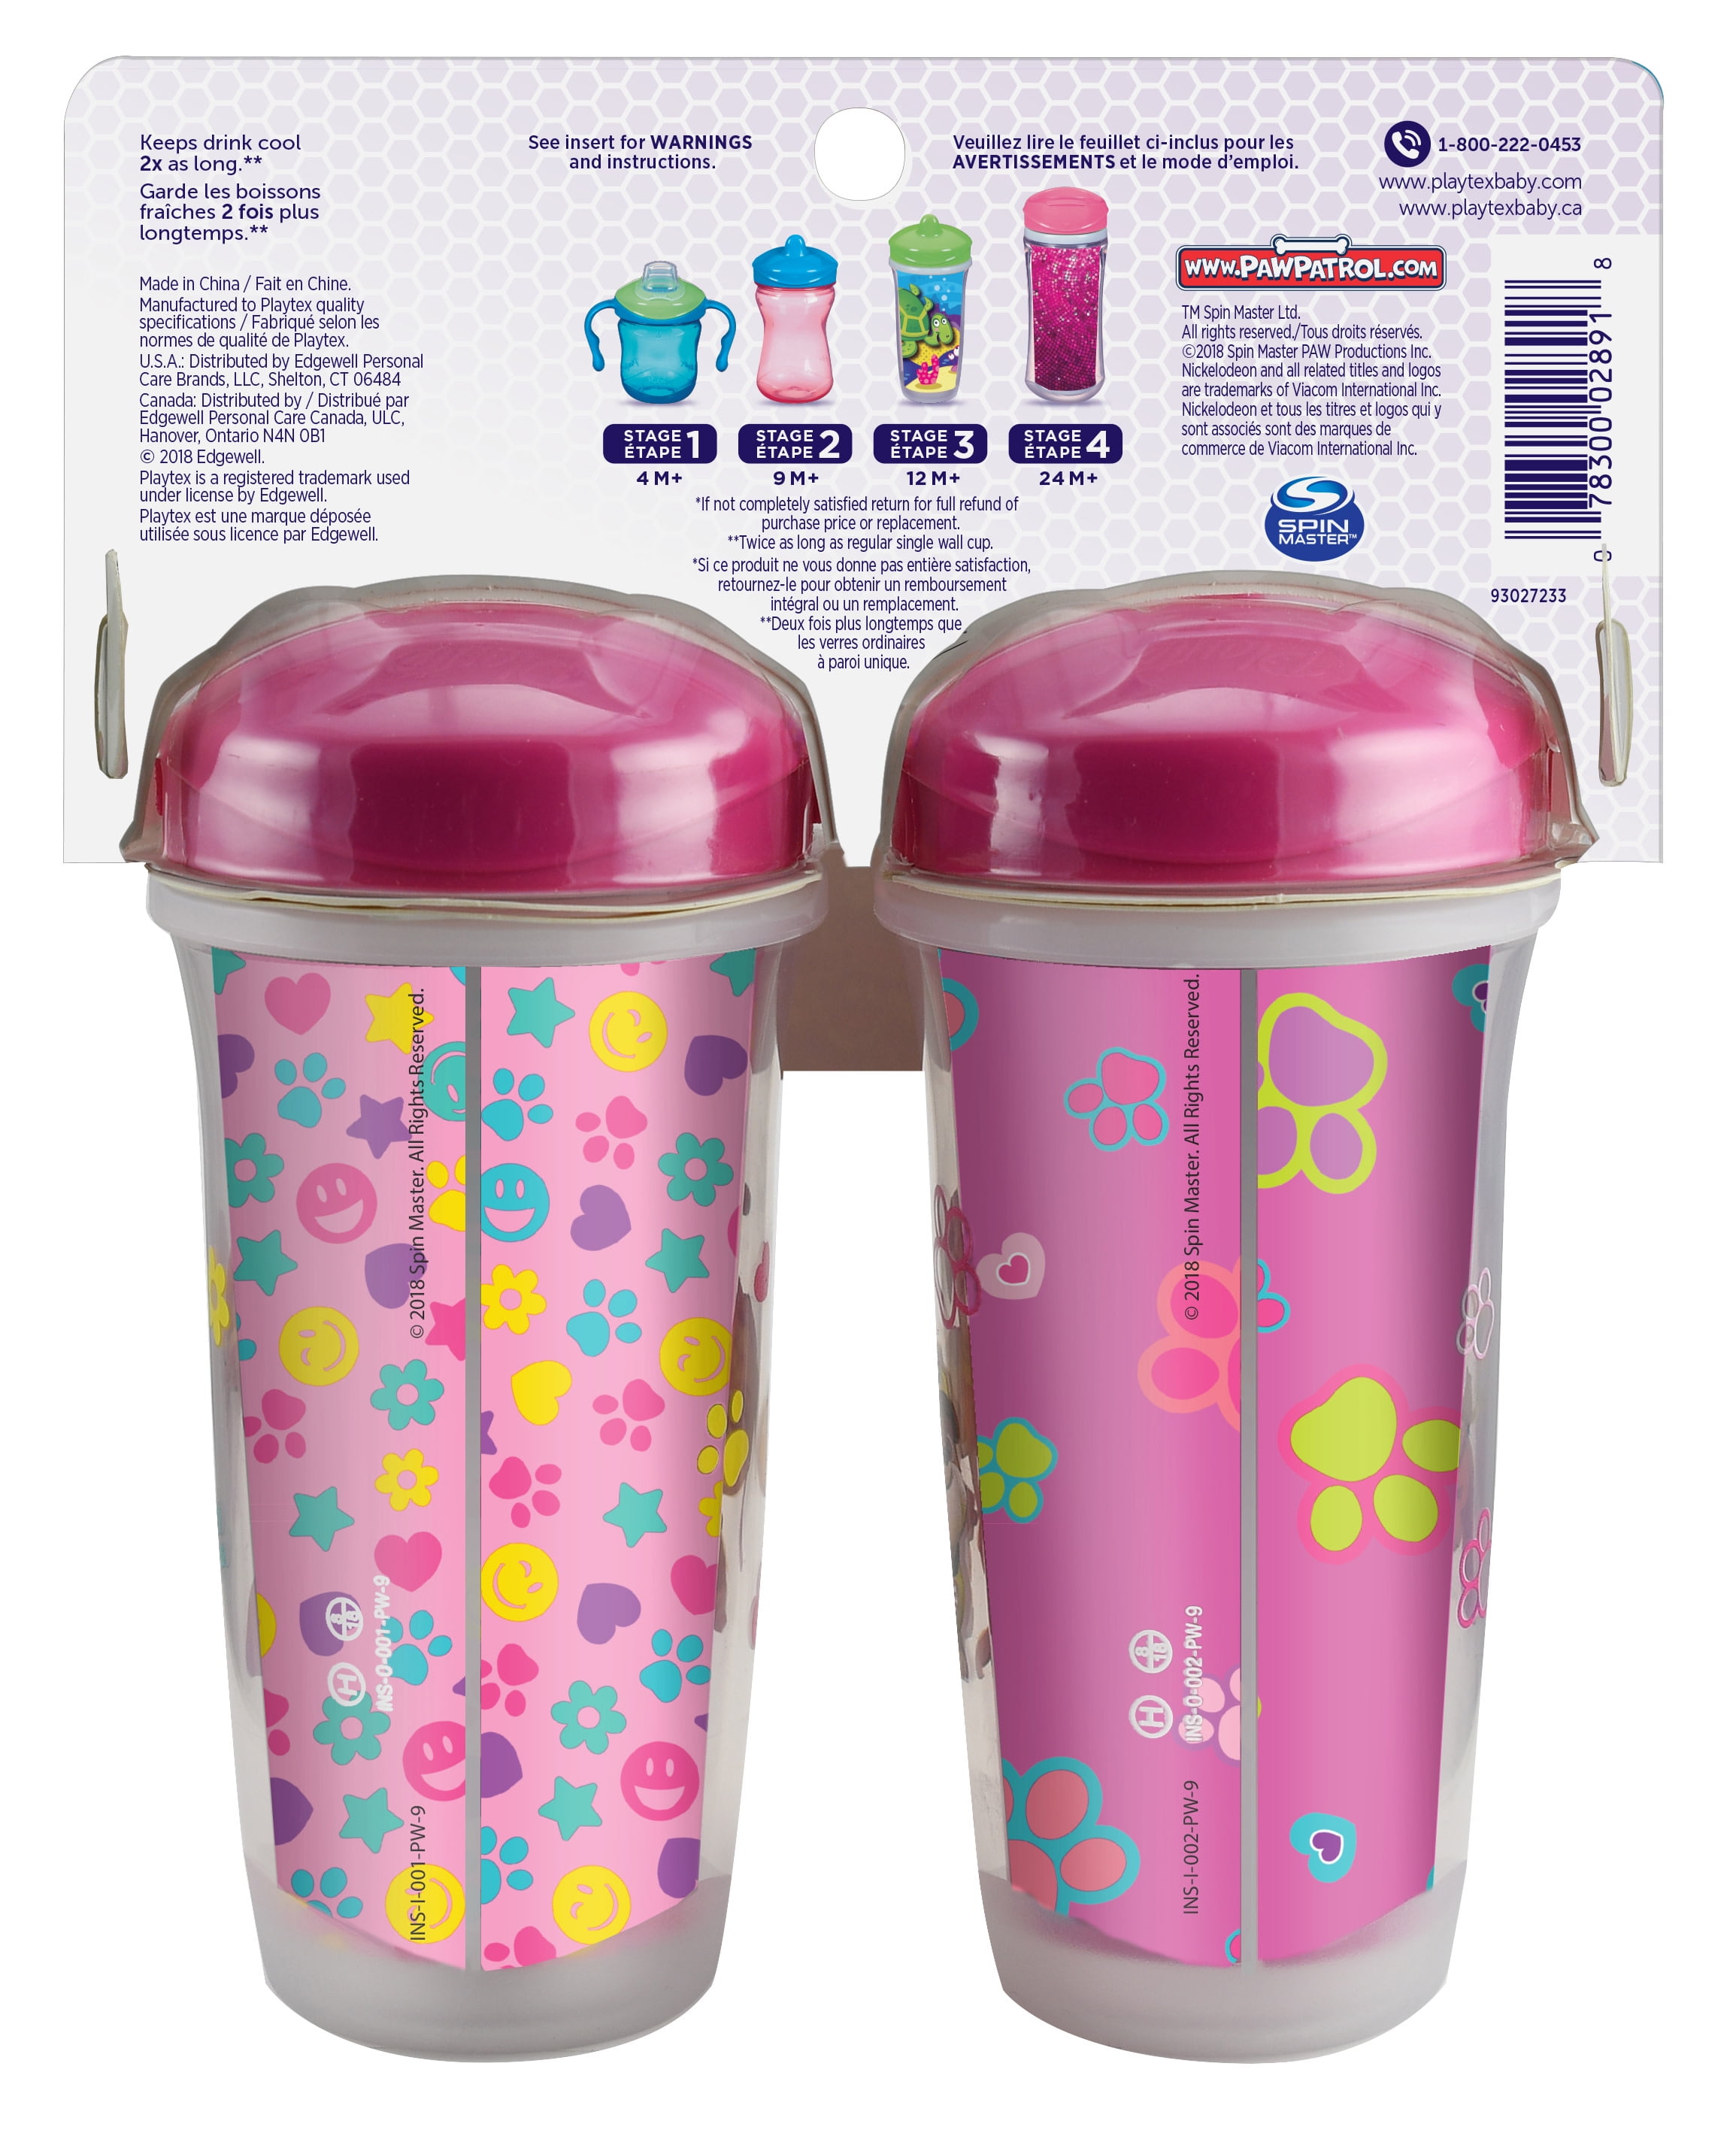 Playtex Sipsters Peppa Pig Stage 3 Insulated Spout Sippy Cup 9oz 1-Pack  Assorted Patterns Reviews 2024